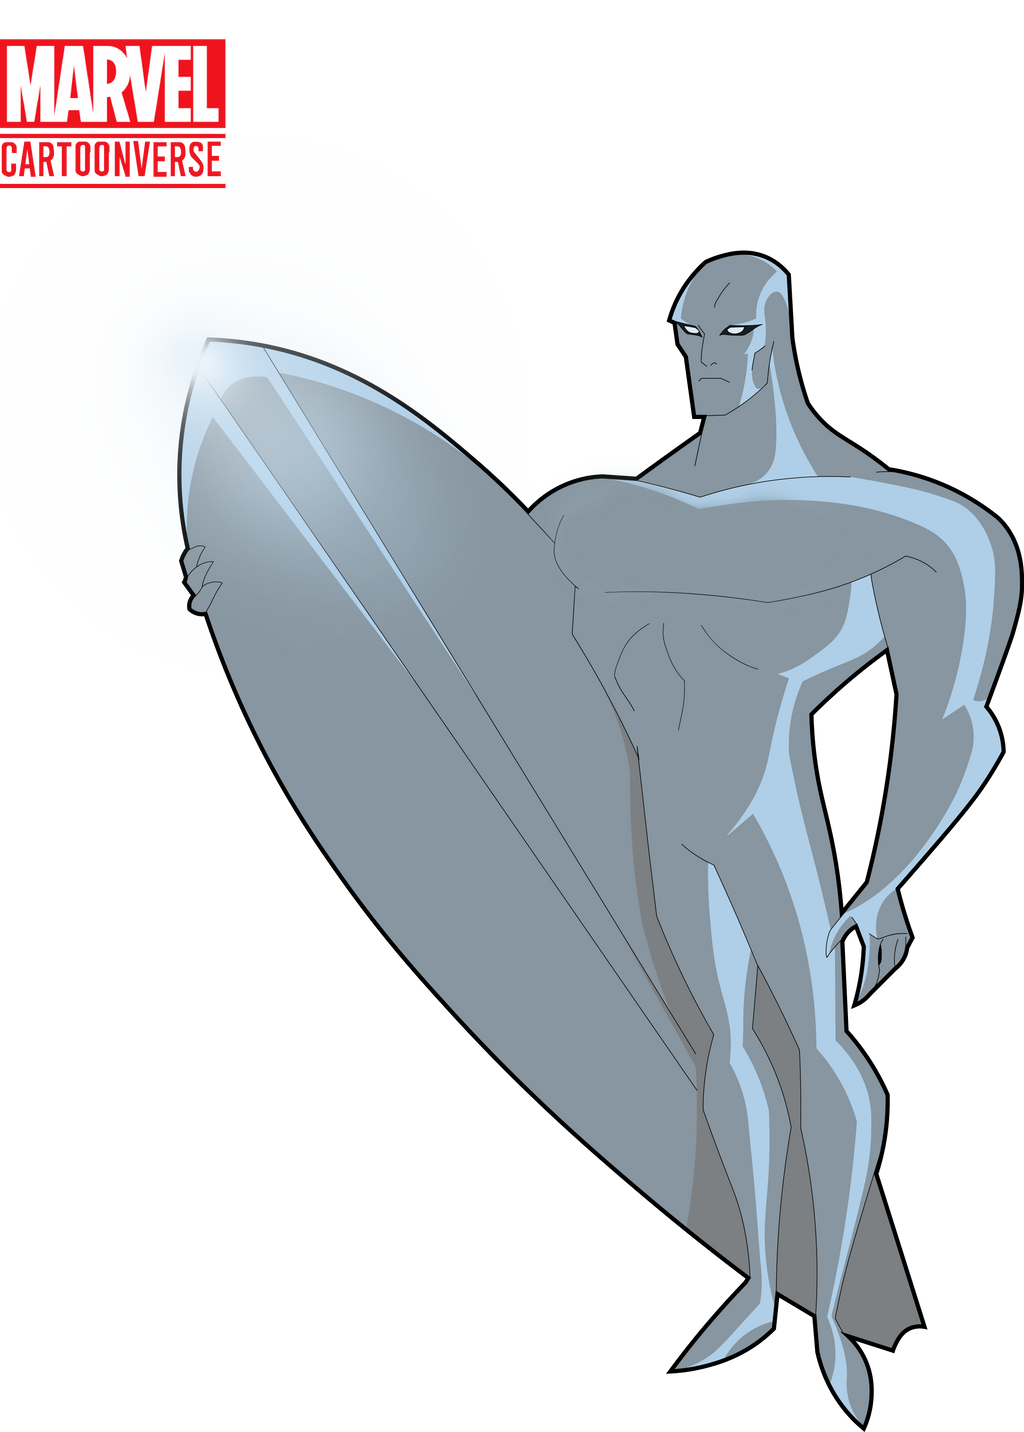 The Silver Surfer by hectorvonjekyllhyde on DeviantArt